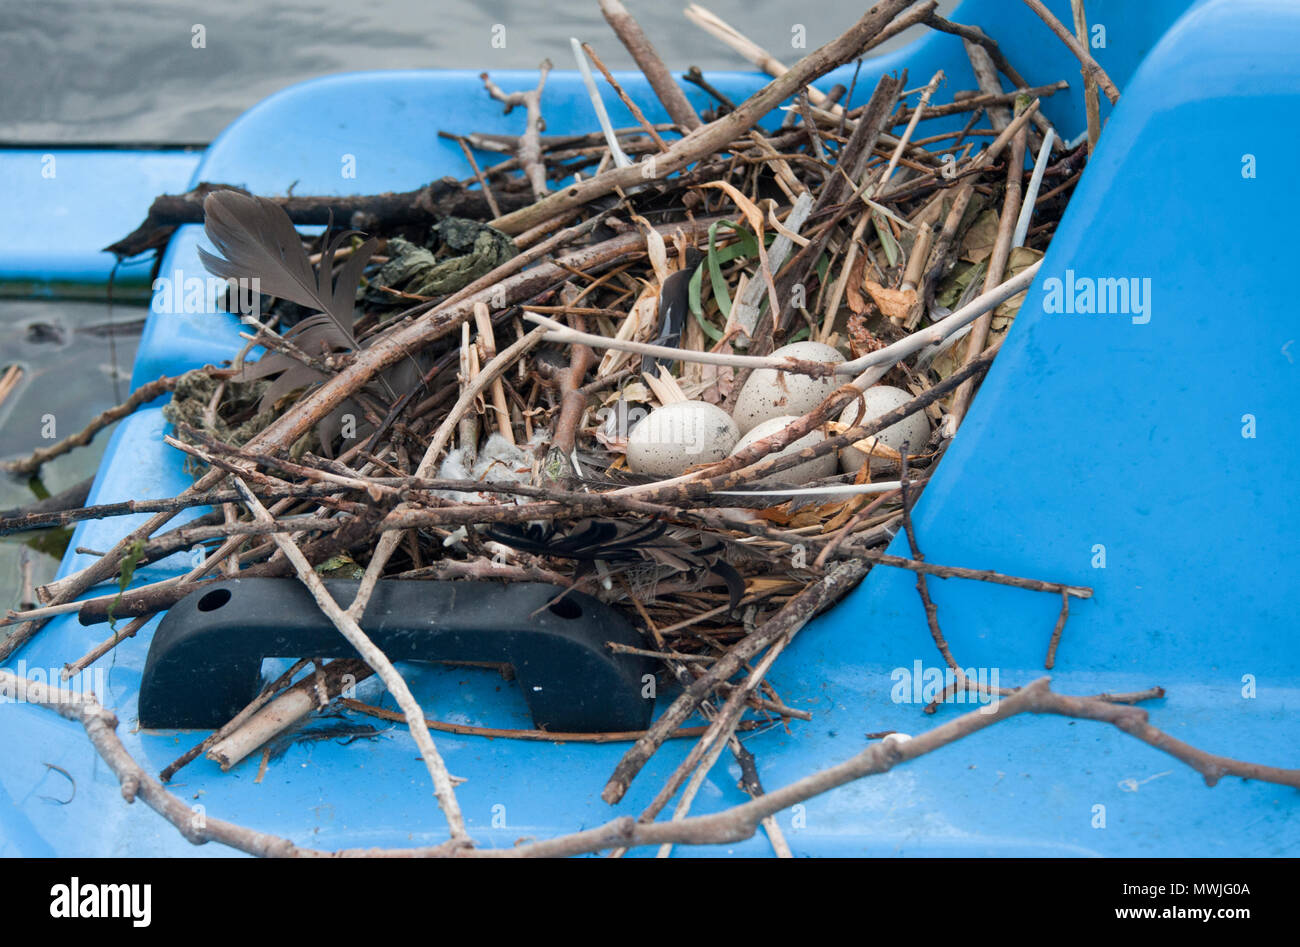 nest and eggs of Eurasian coot, (Fulica atra), also known as the Common Coot or Coot, built on top of boat in Regents Park lake, London,United Kingdom Stock Photo